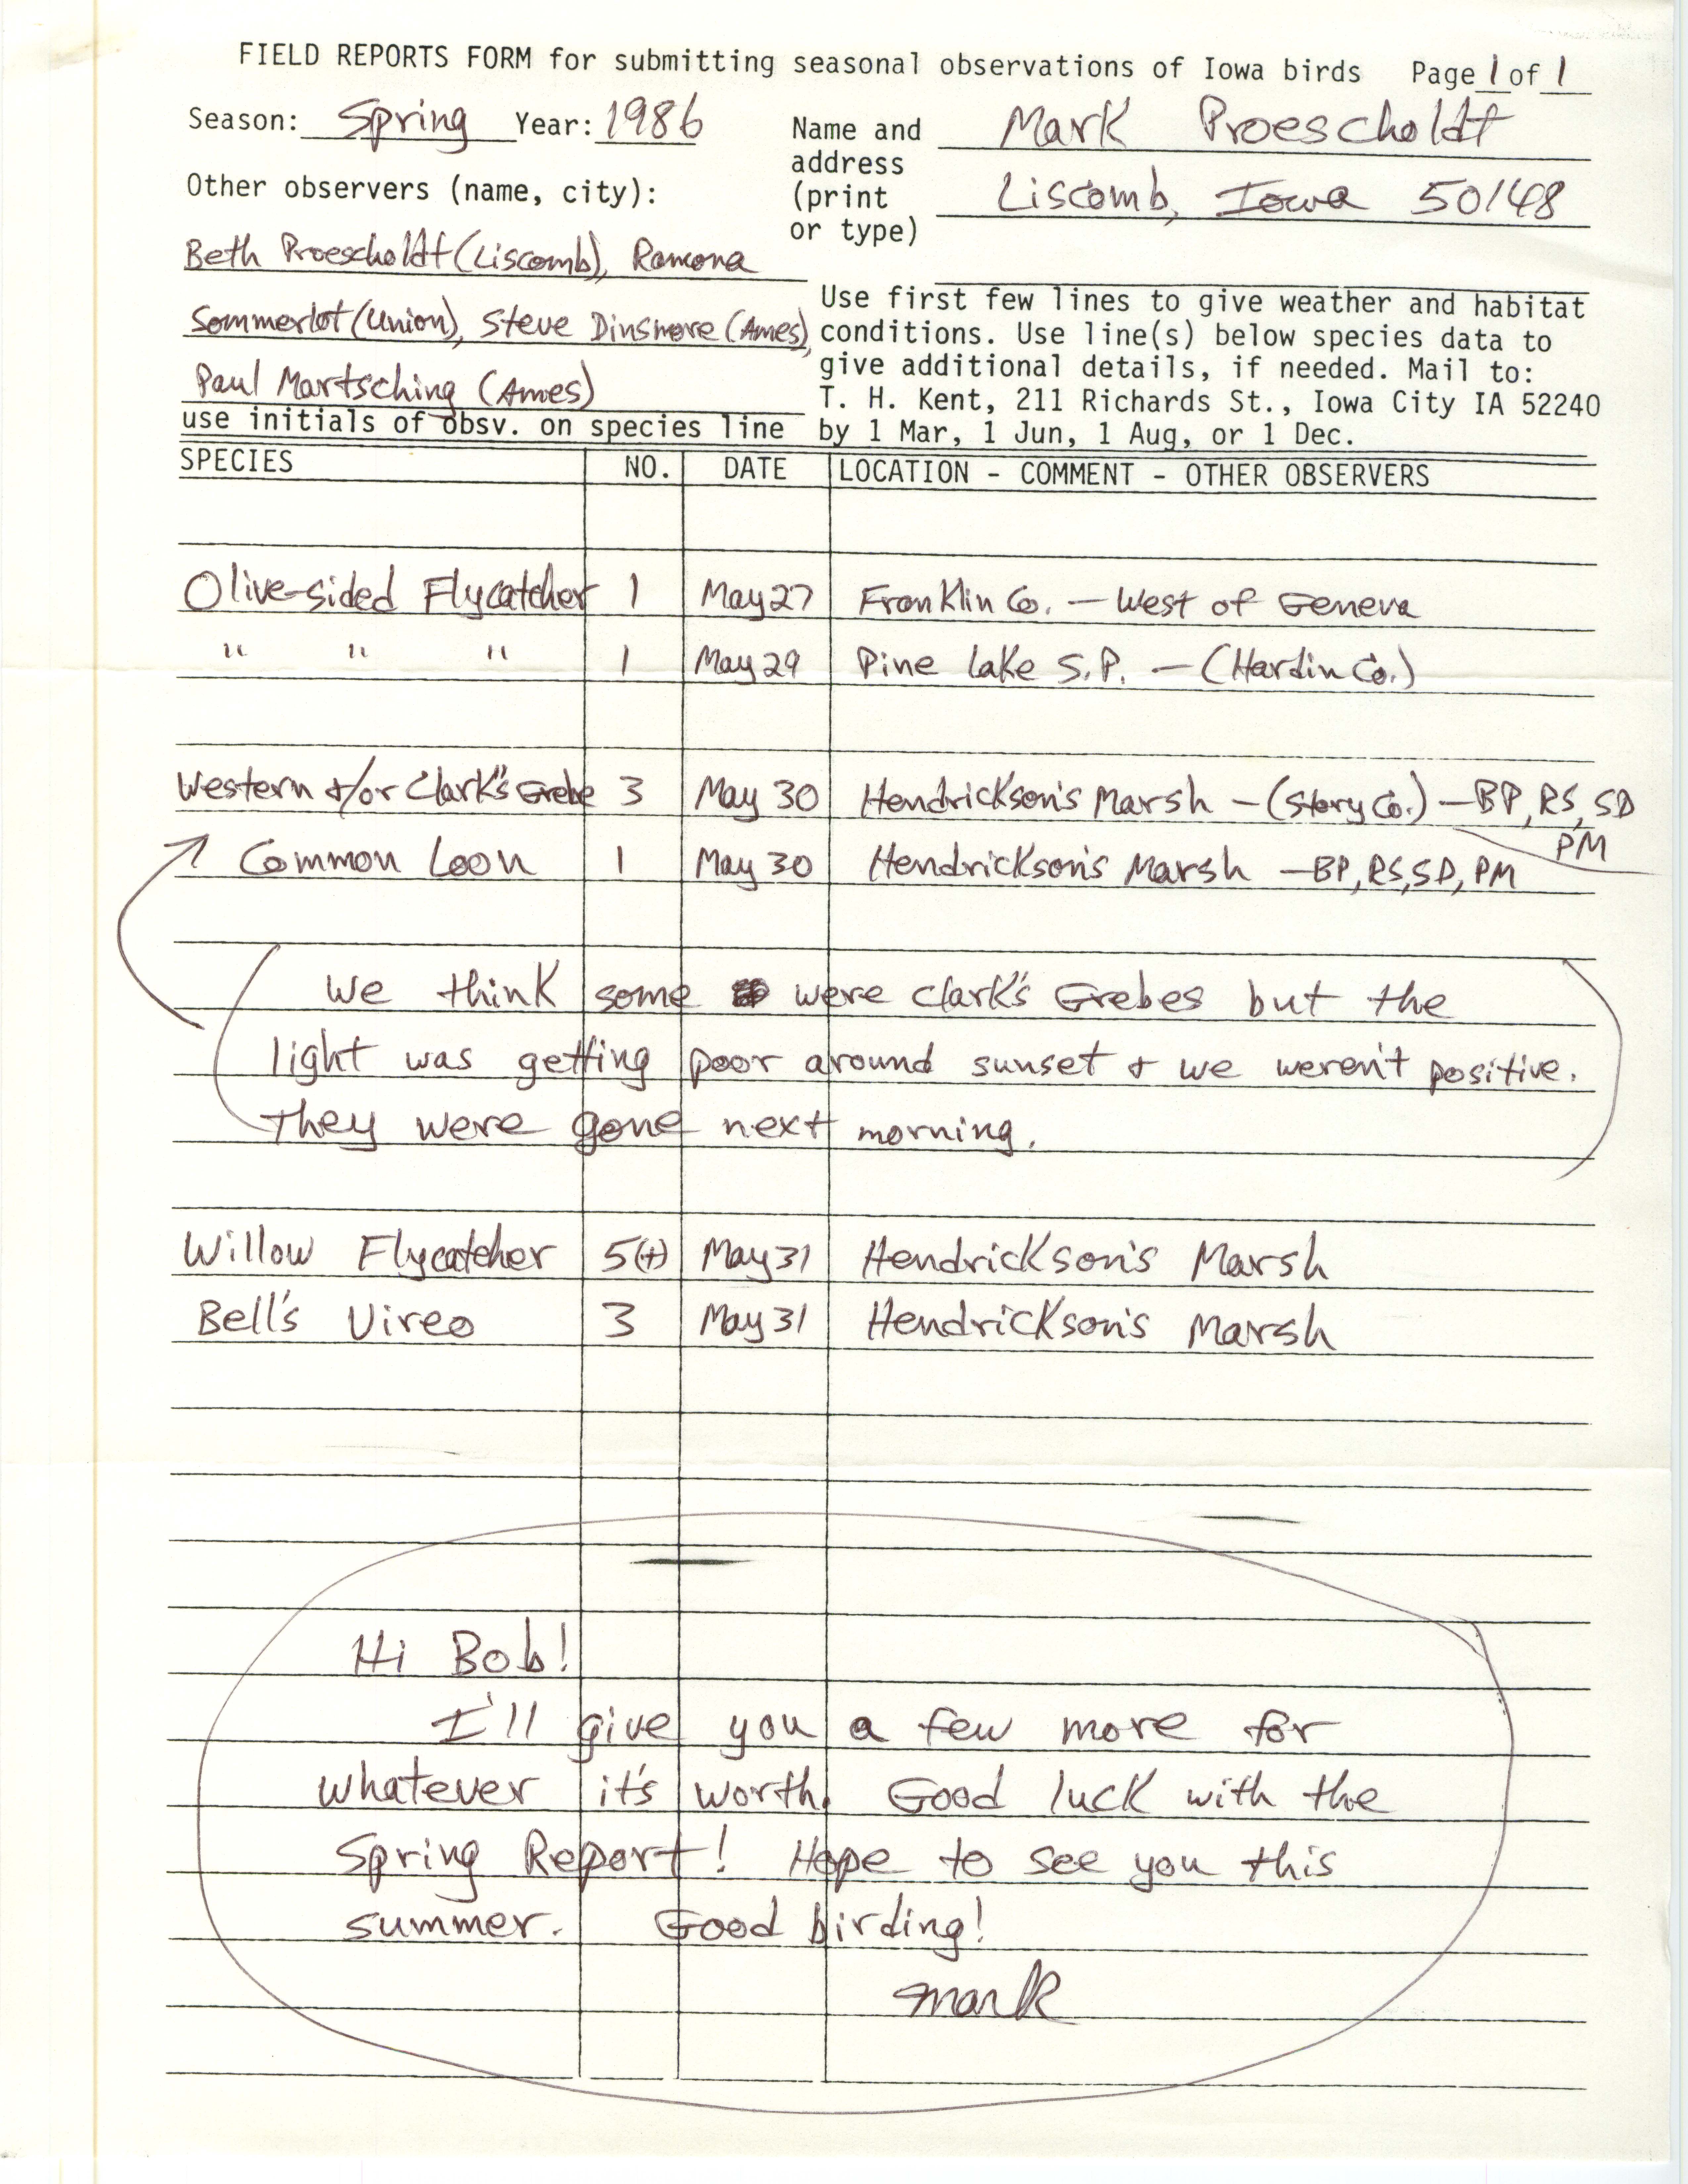 Field reports form for submitting seasonal observations of Iowa birds, Mark Proescholdt, Spring 1986 additional